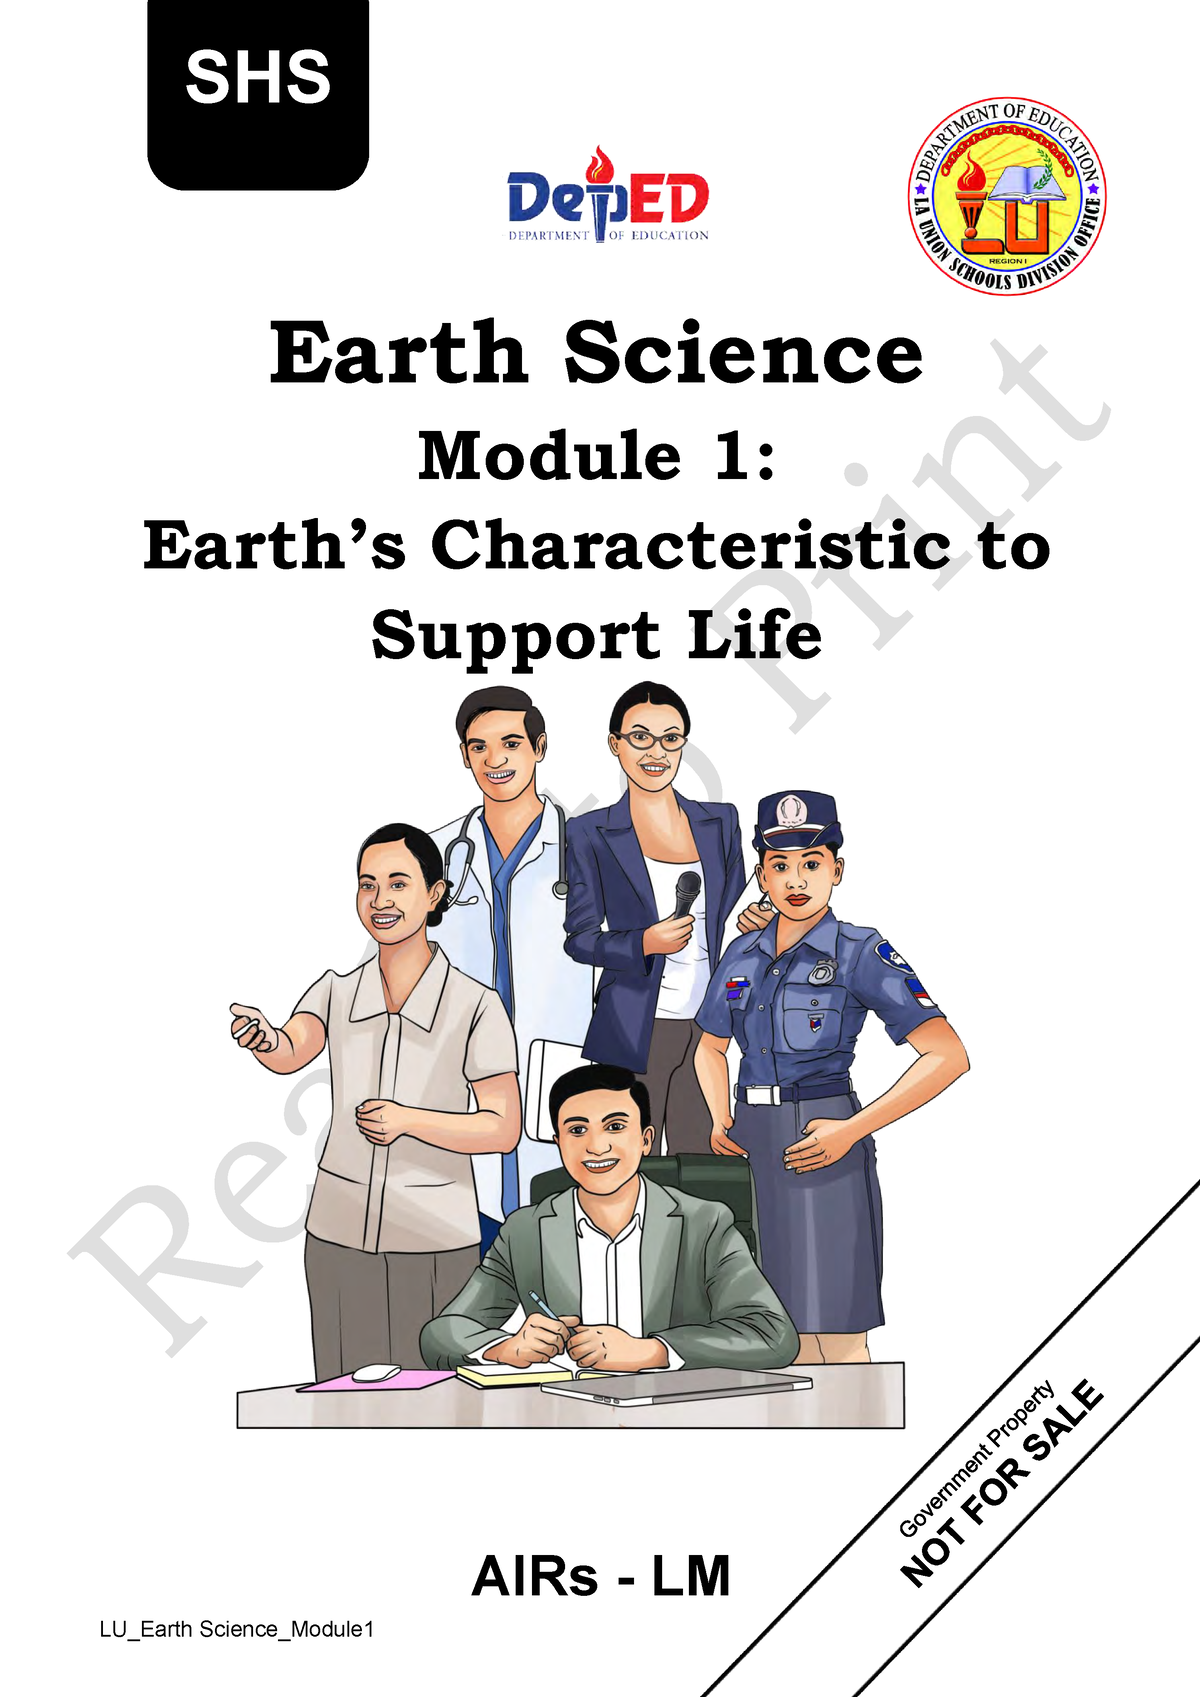 Es Q1 Mod1 Earth Science Shs Earth Science Module 1 Earths Characteristic To Support Life 6255